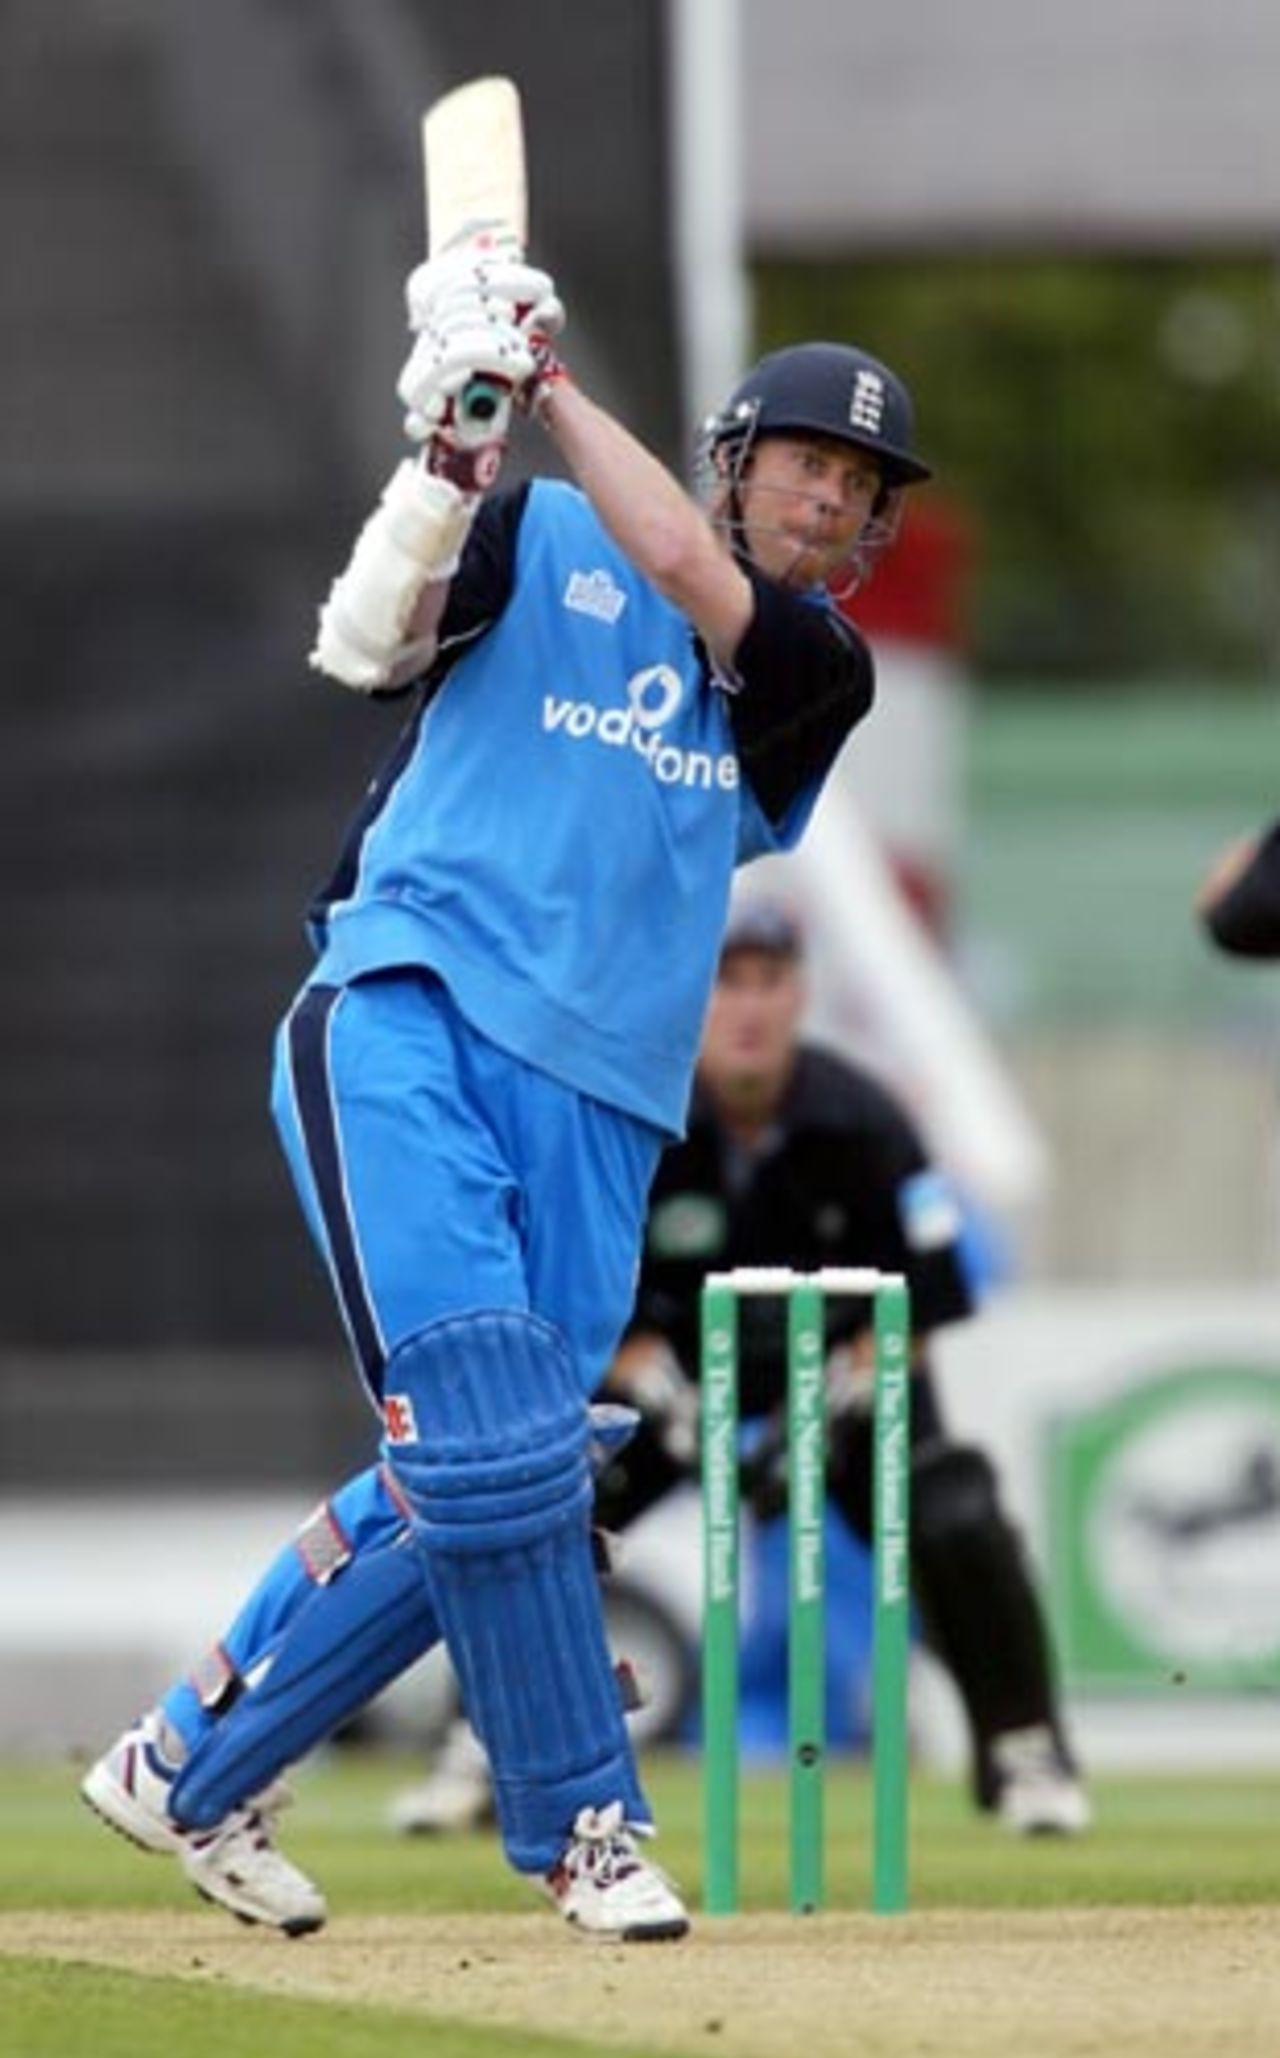 England batsman Nick Knight drives down the ground on the off side during his innings of 73. New Zealand wicket-keeper Chris Nevin looks on in the background. 1st ODI: New Zealand v England at Jade Stadium, Christchurch, 13 February 2002.